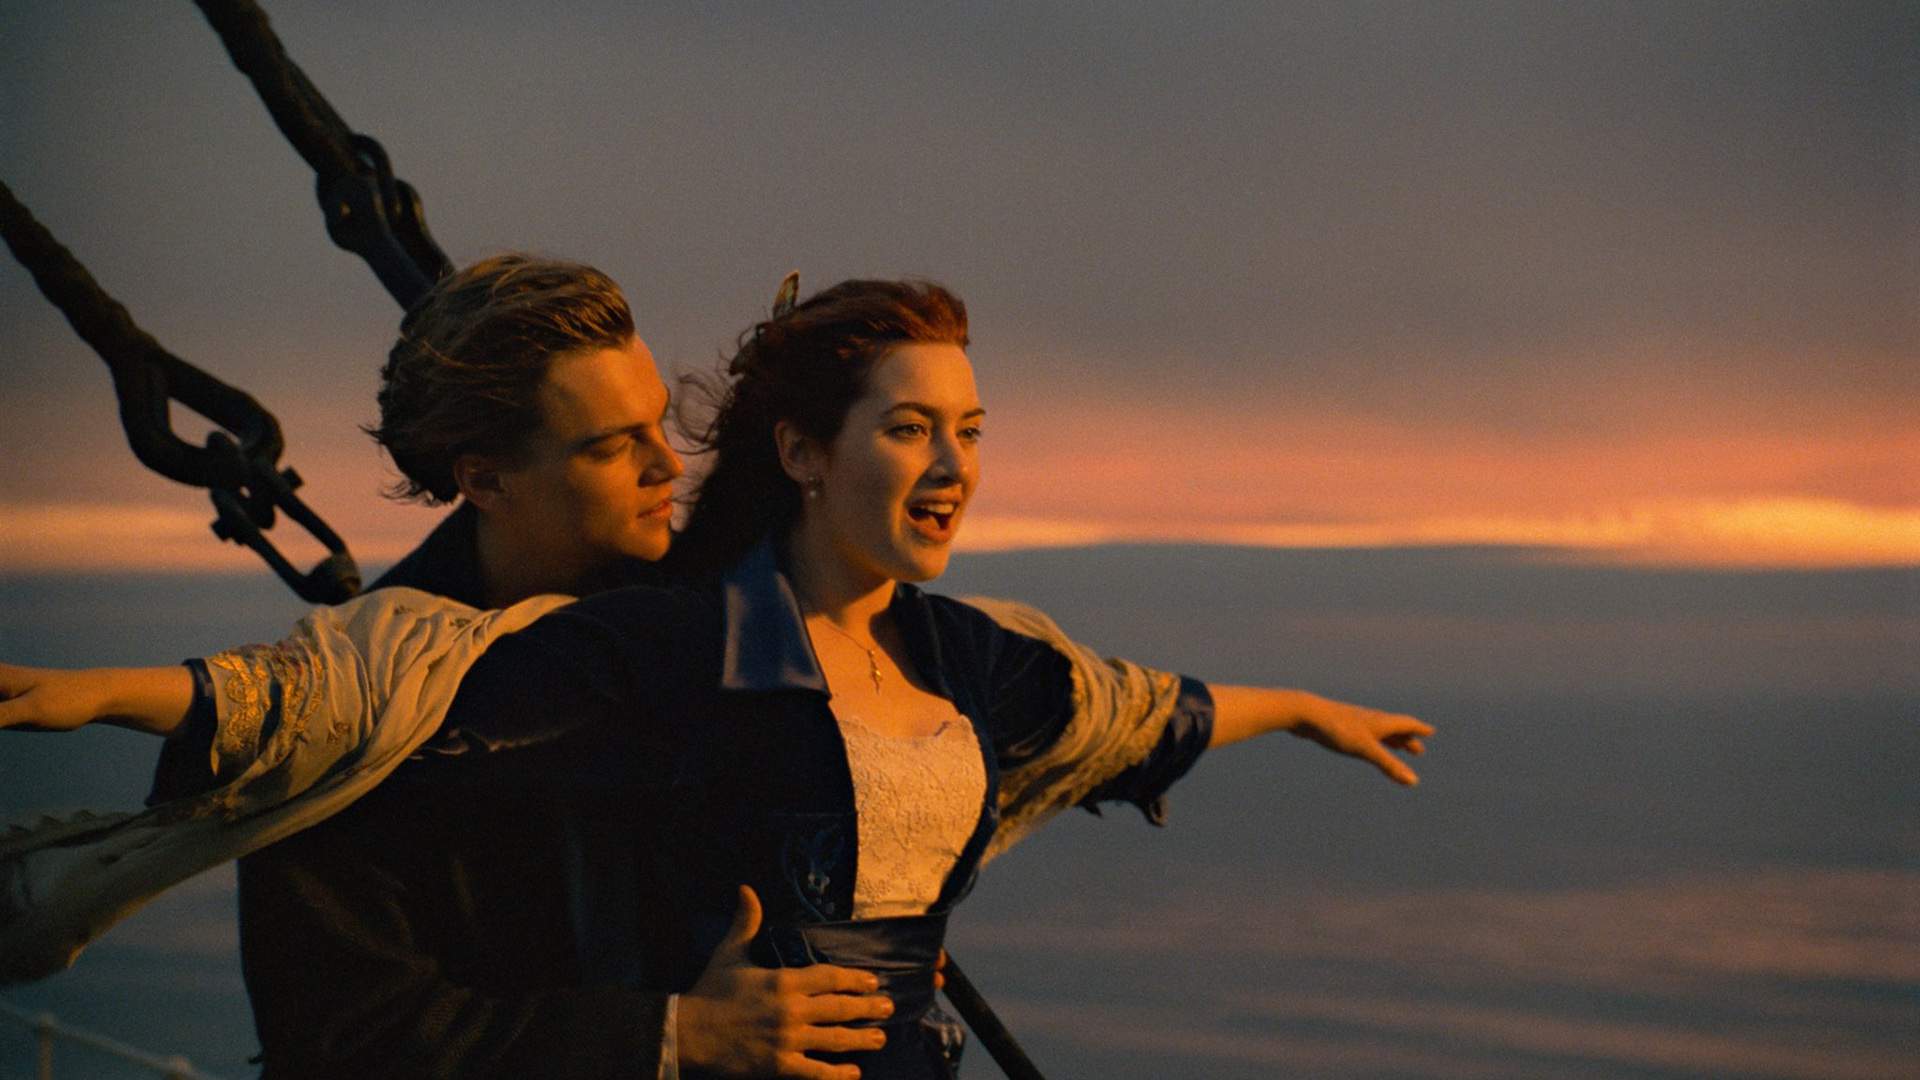 This Immersive Cinema Experience Will Let You Pretend You're On the Titanic